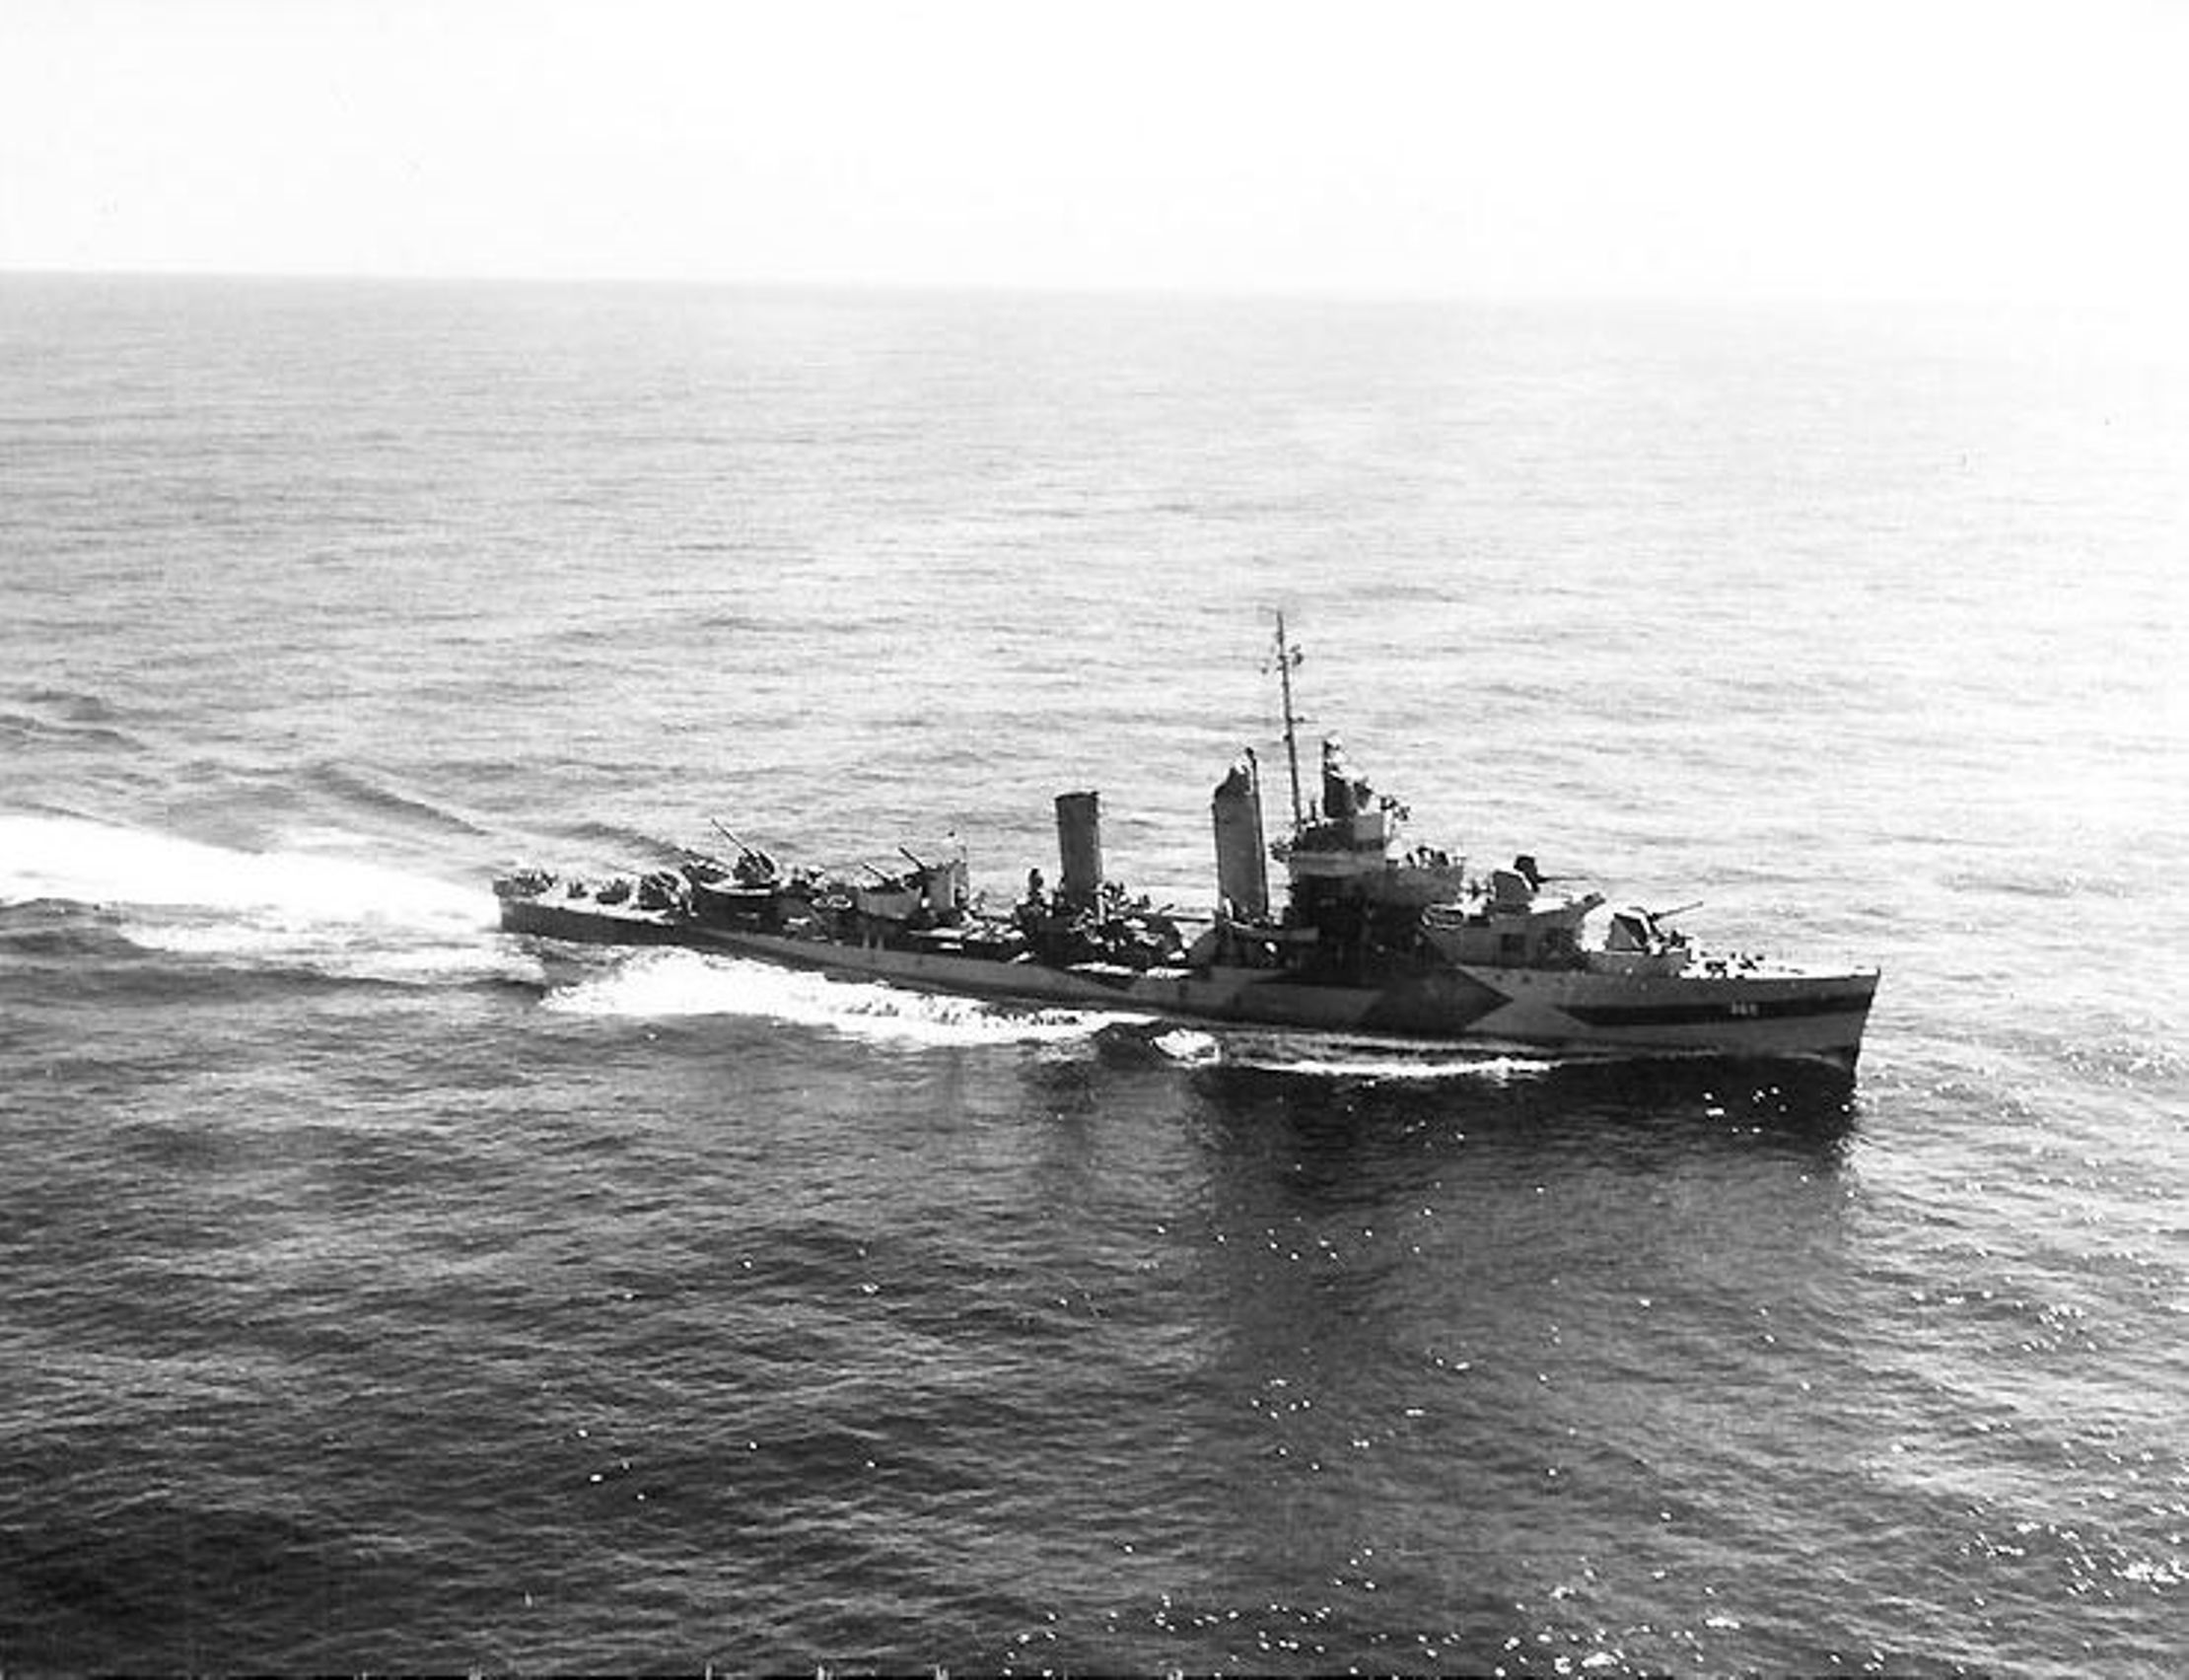 USS Cummings in Measure 32 Design 23D paint scheme as seen from an aircraft from USS Monterey while approaching Wake Island for a bombardment, 3 Sep 1944. Photo 2 of 2.